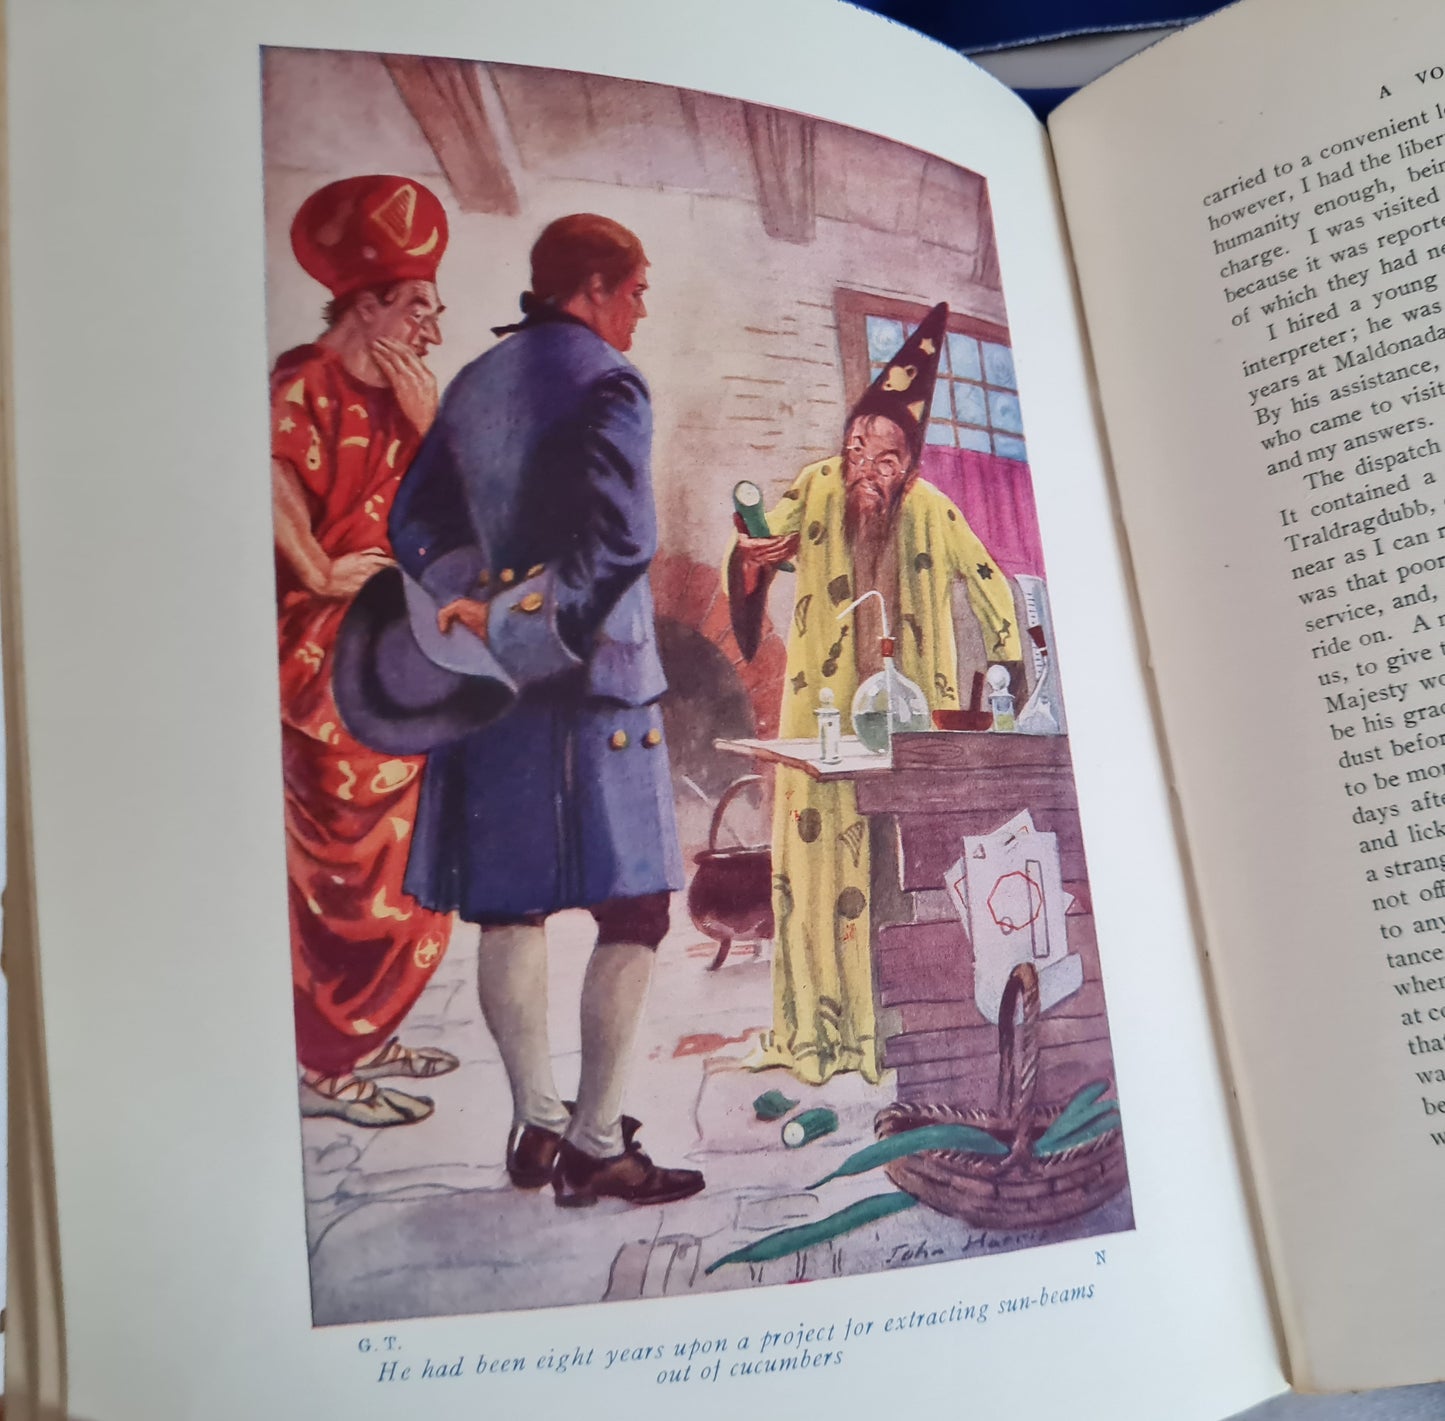 1930s Gulliver's Travels by Jonathan Swift / Hutchinson & Co., London / Decorative Boards / Colour Illustrations, Maps / Antique Book